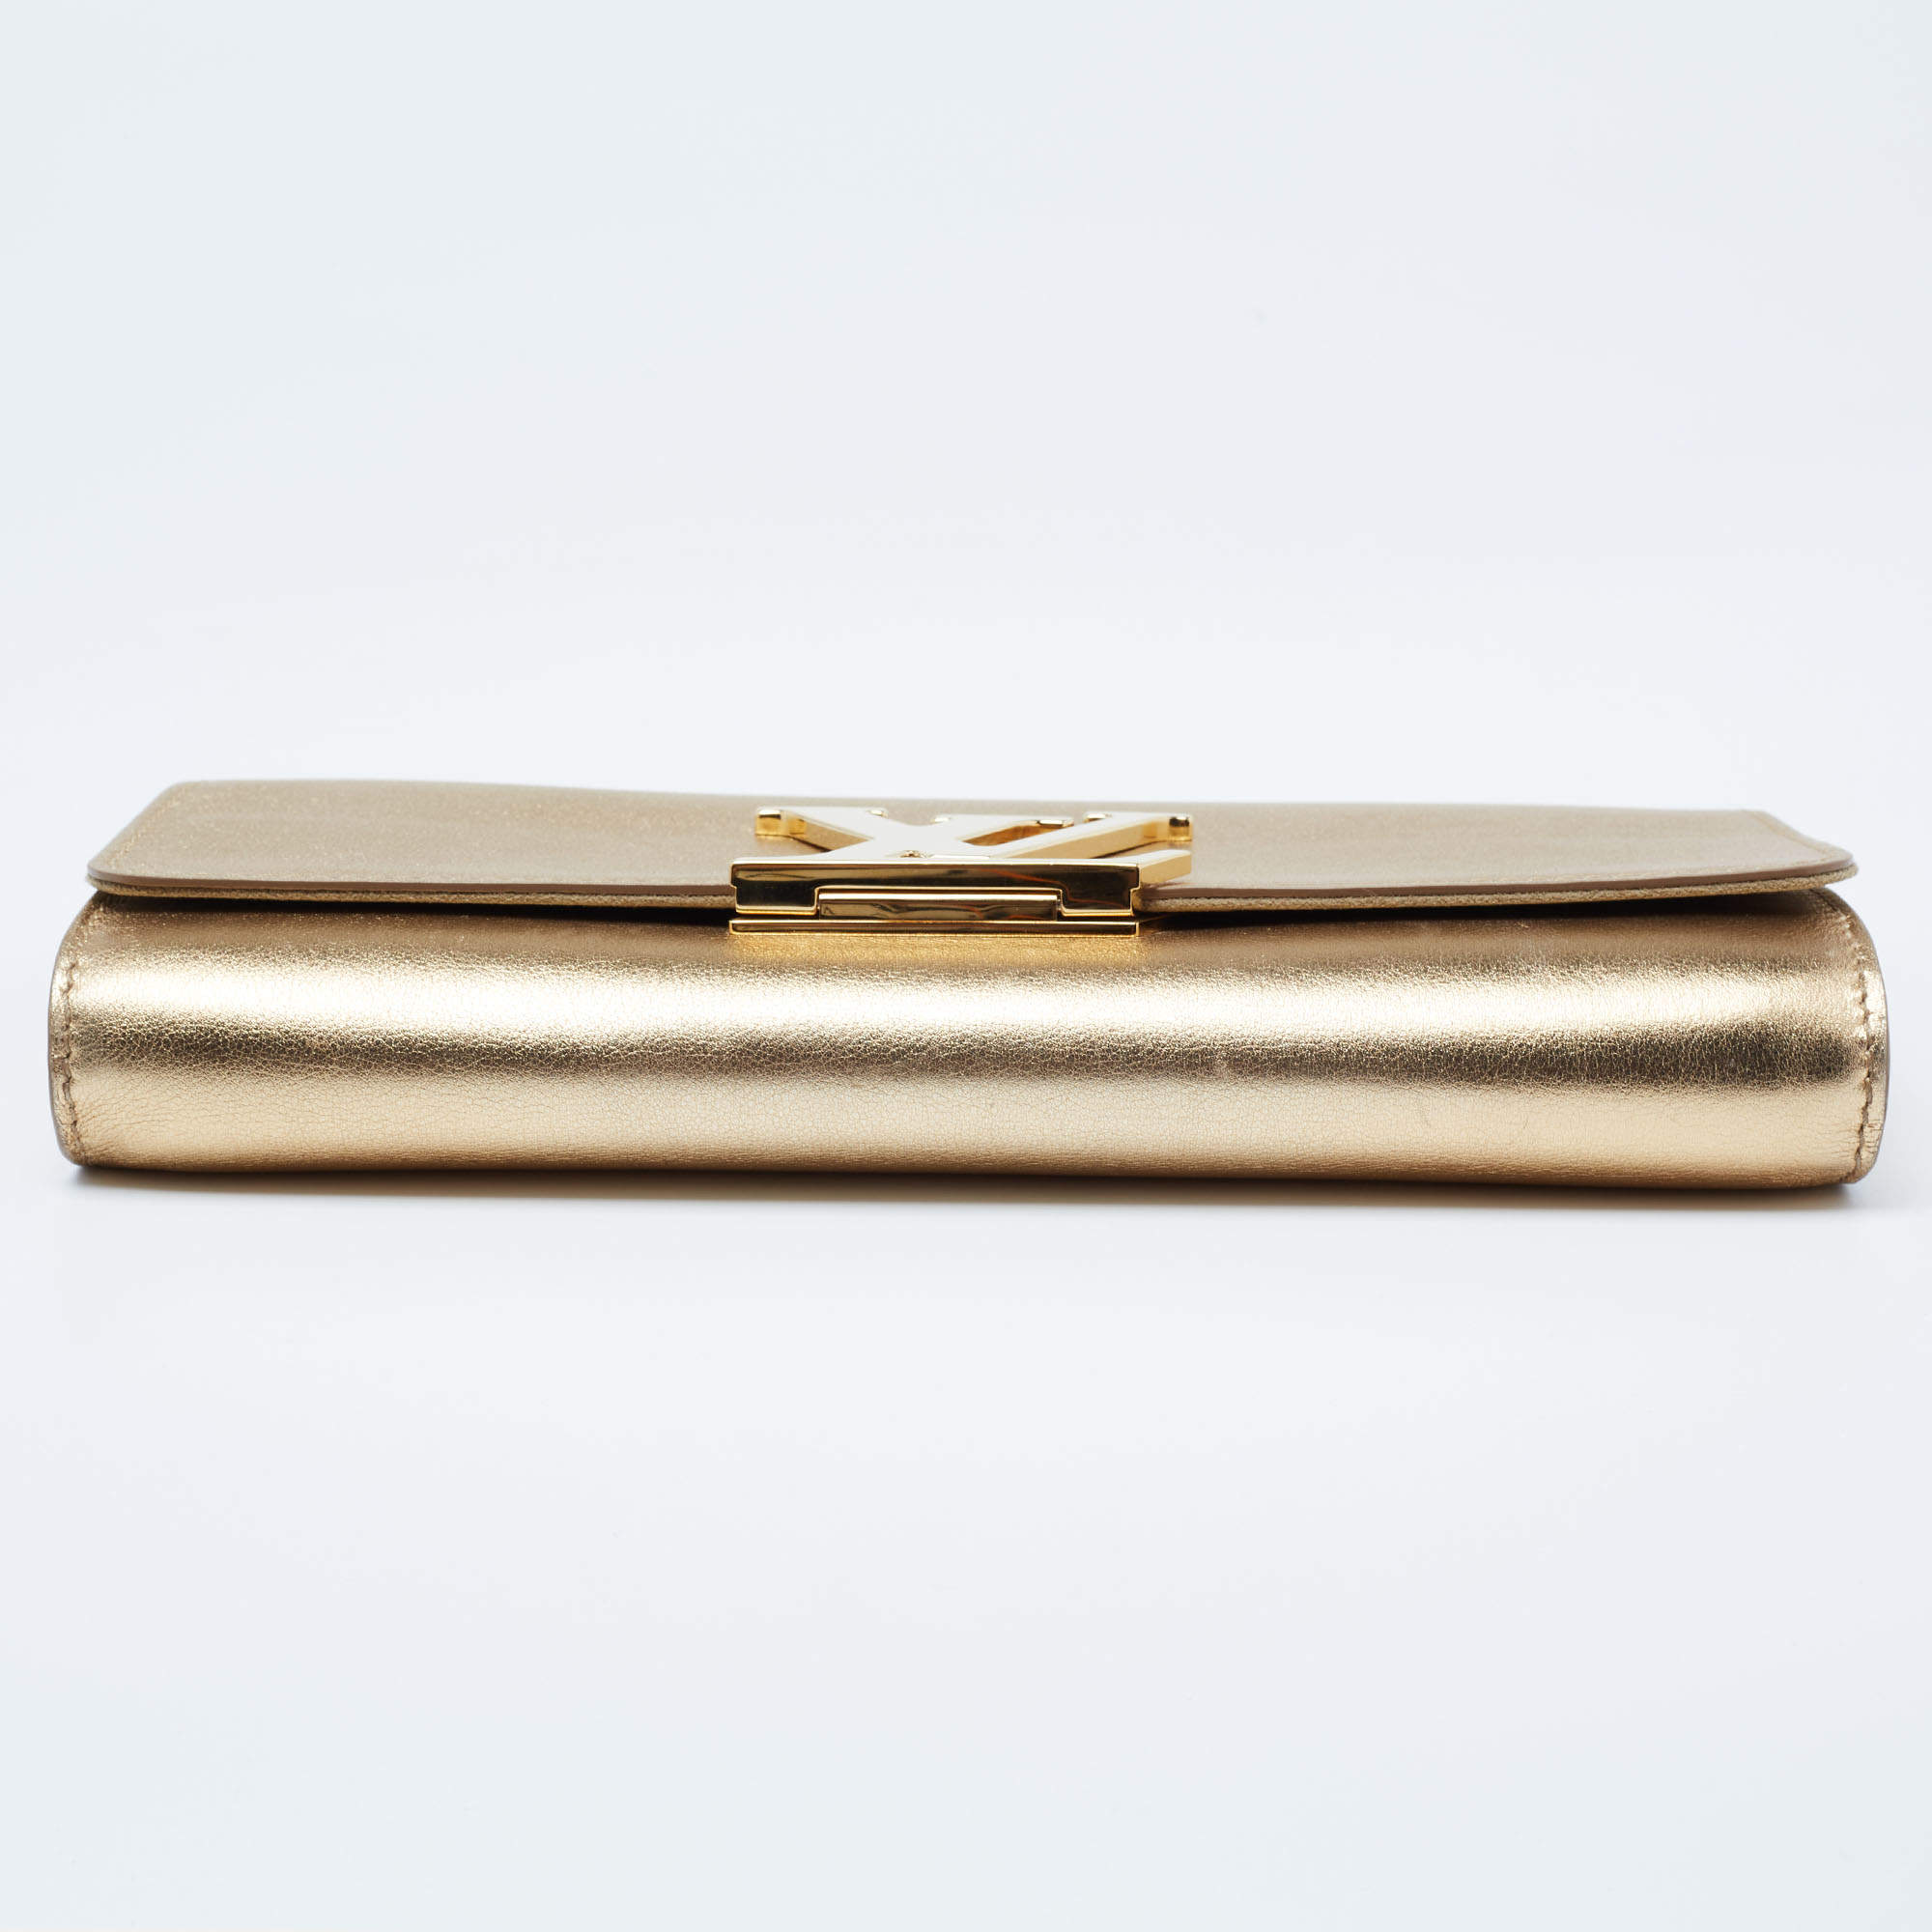 Louis Vuitton Gold Leather Louise Clutch at 1stDibs  louis vuitton gold  clutch bag, gold louis vuitton clutch, lv gold clutch